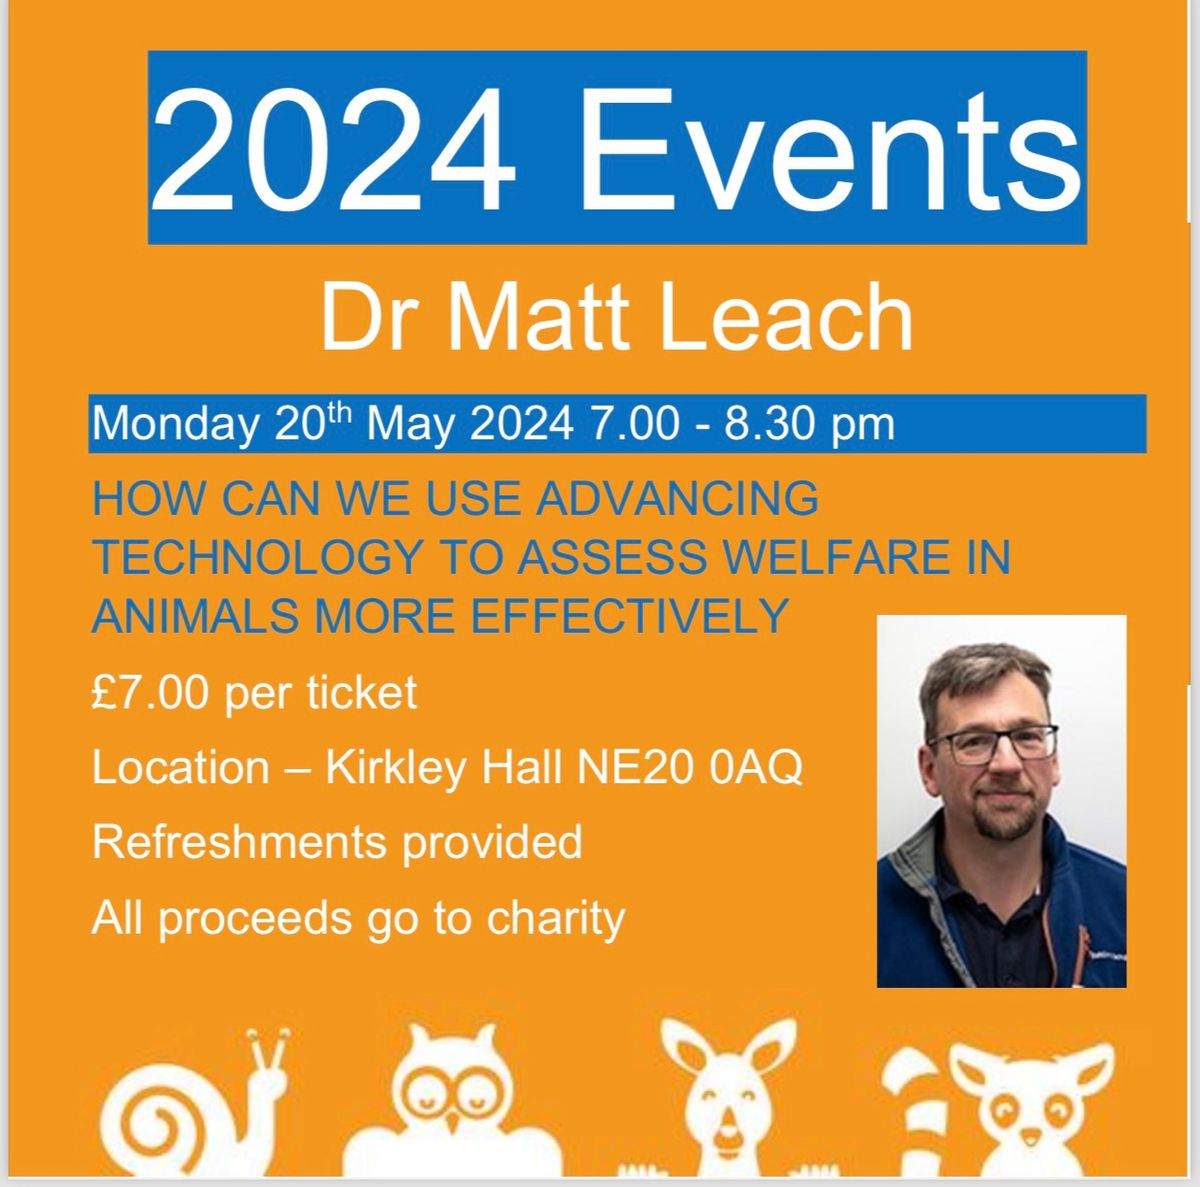 Dr Matt Leach - how can we use advancing technologies in assessing animal welfare 